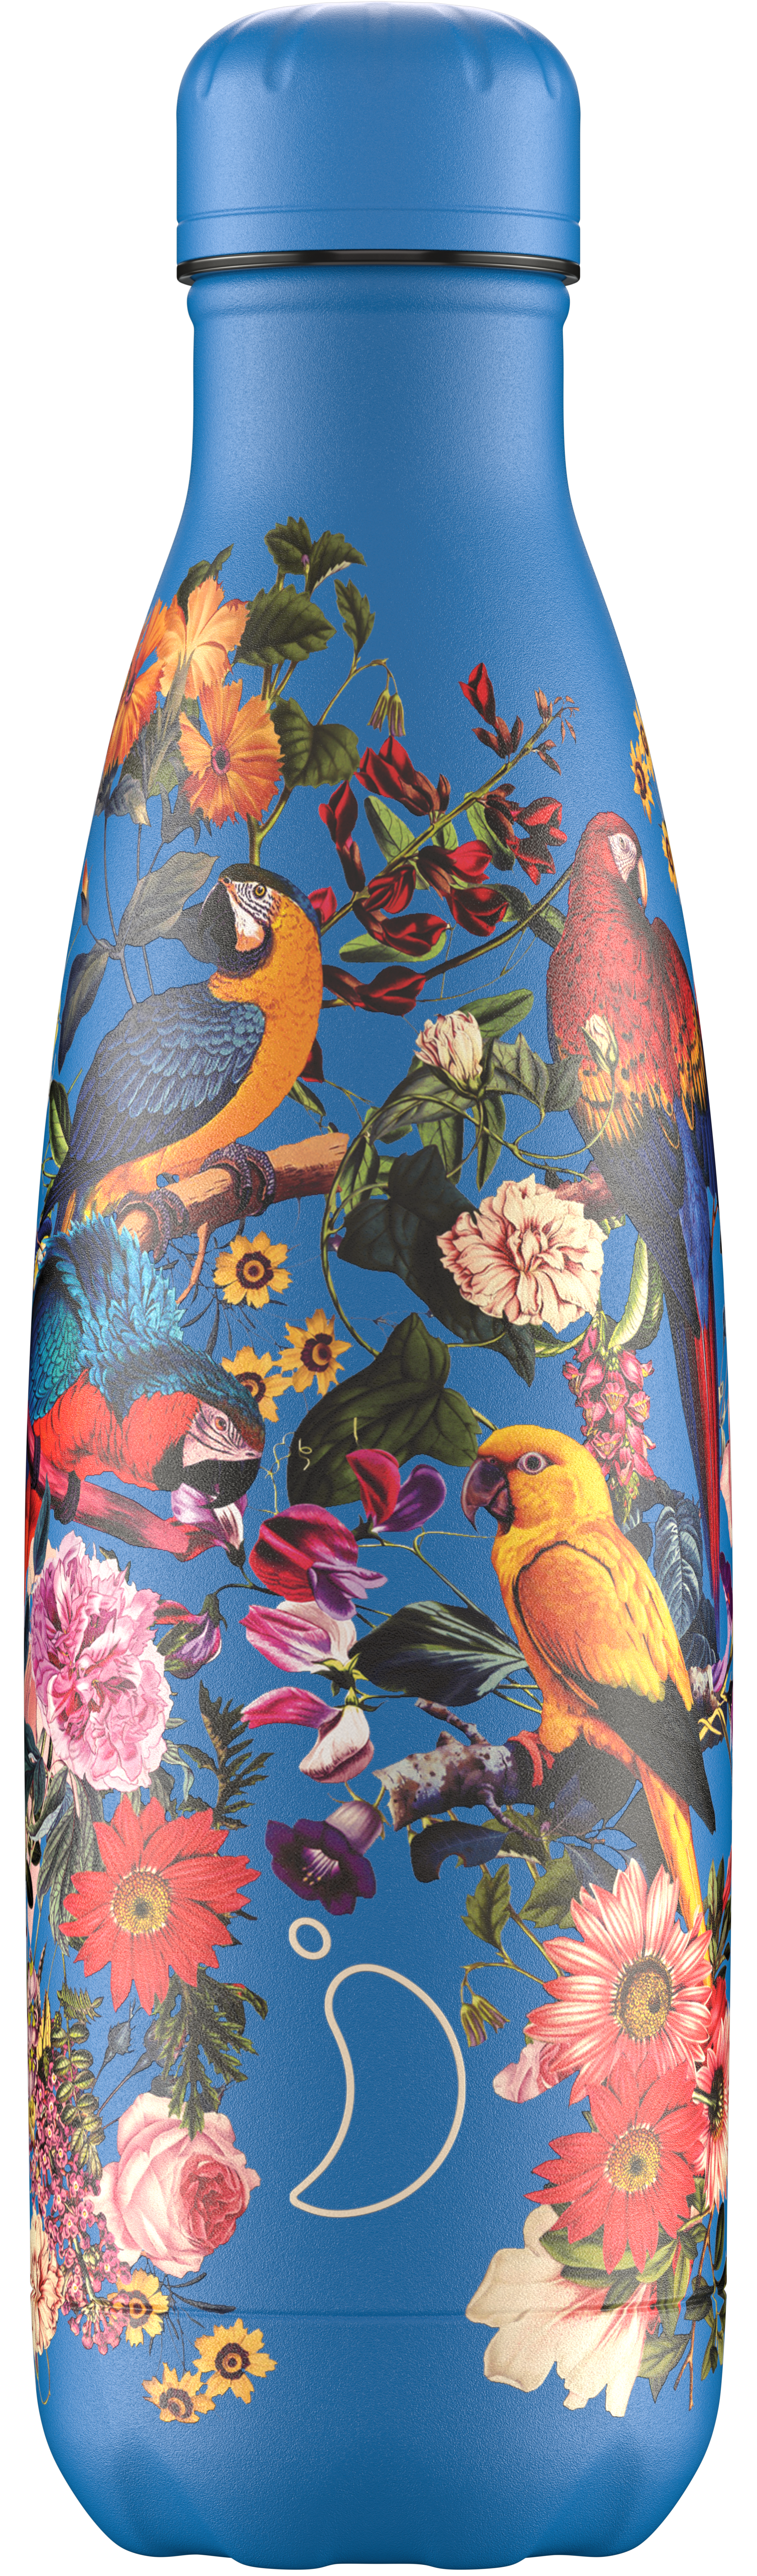 Chilly's Bottle Tropical Edition 500ml - Parrot Blooms